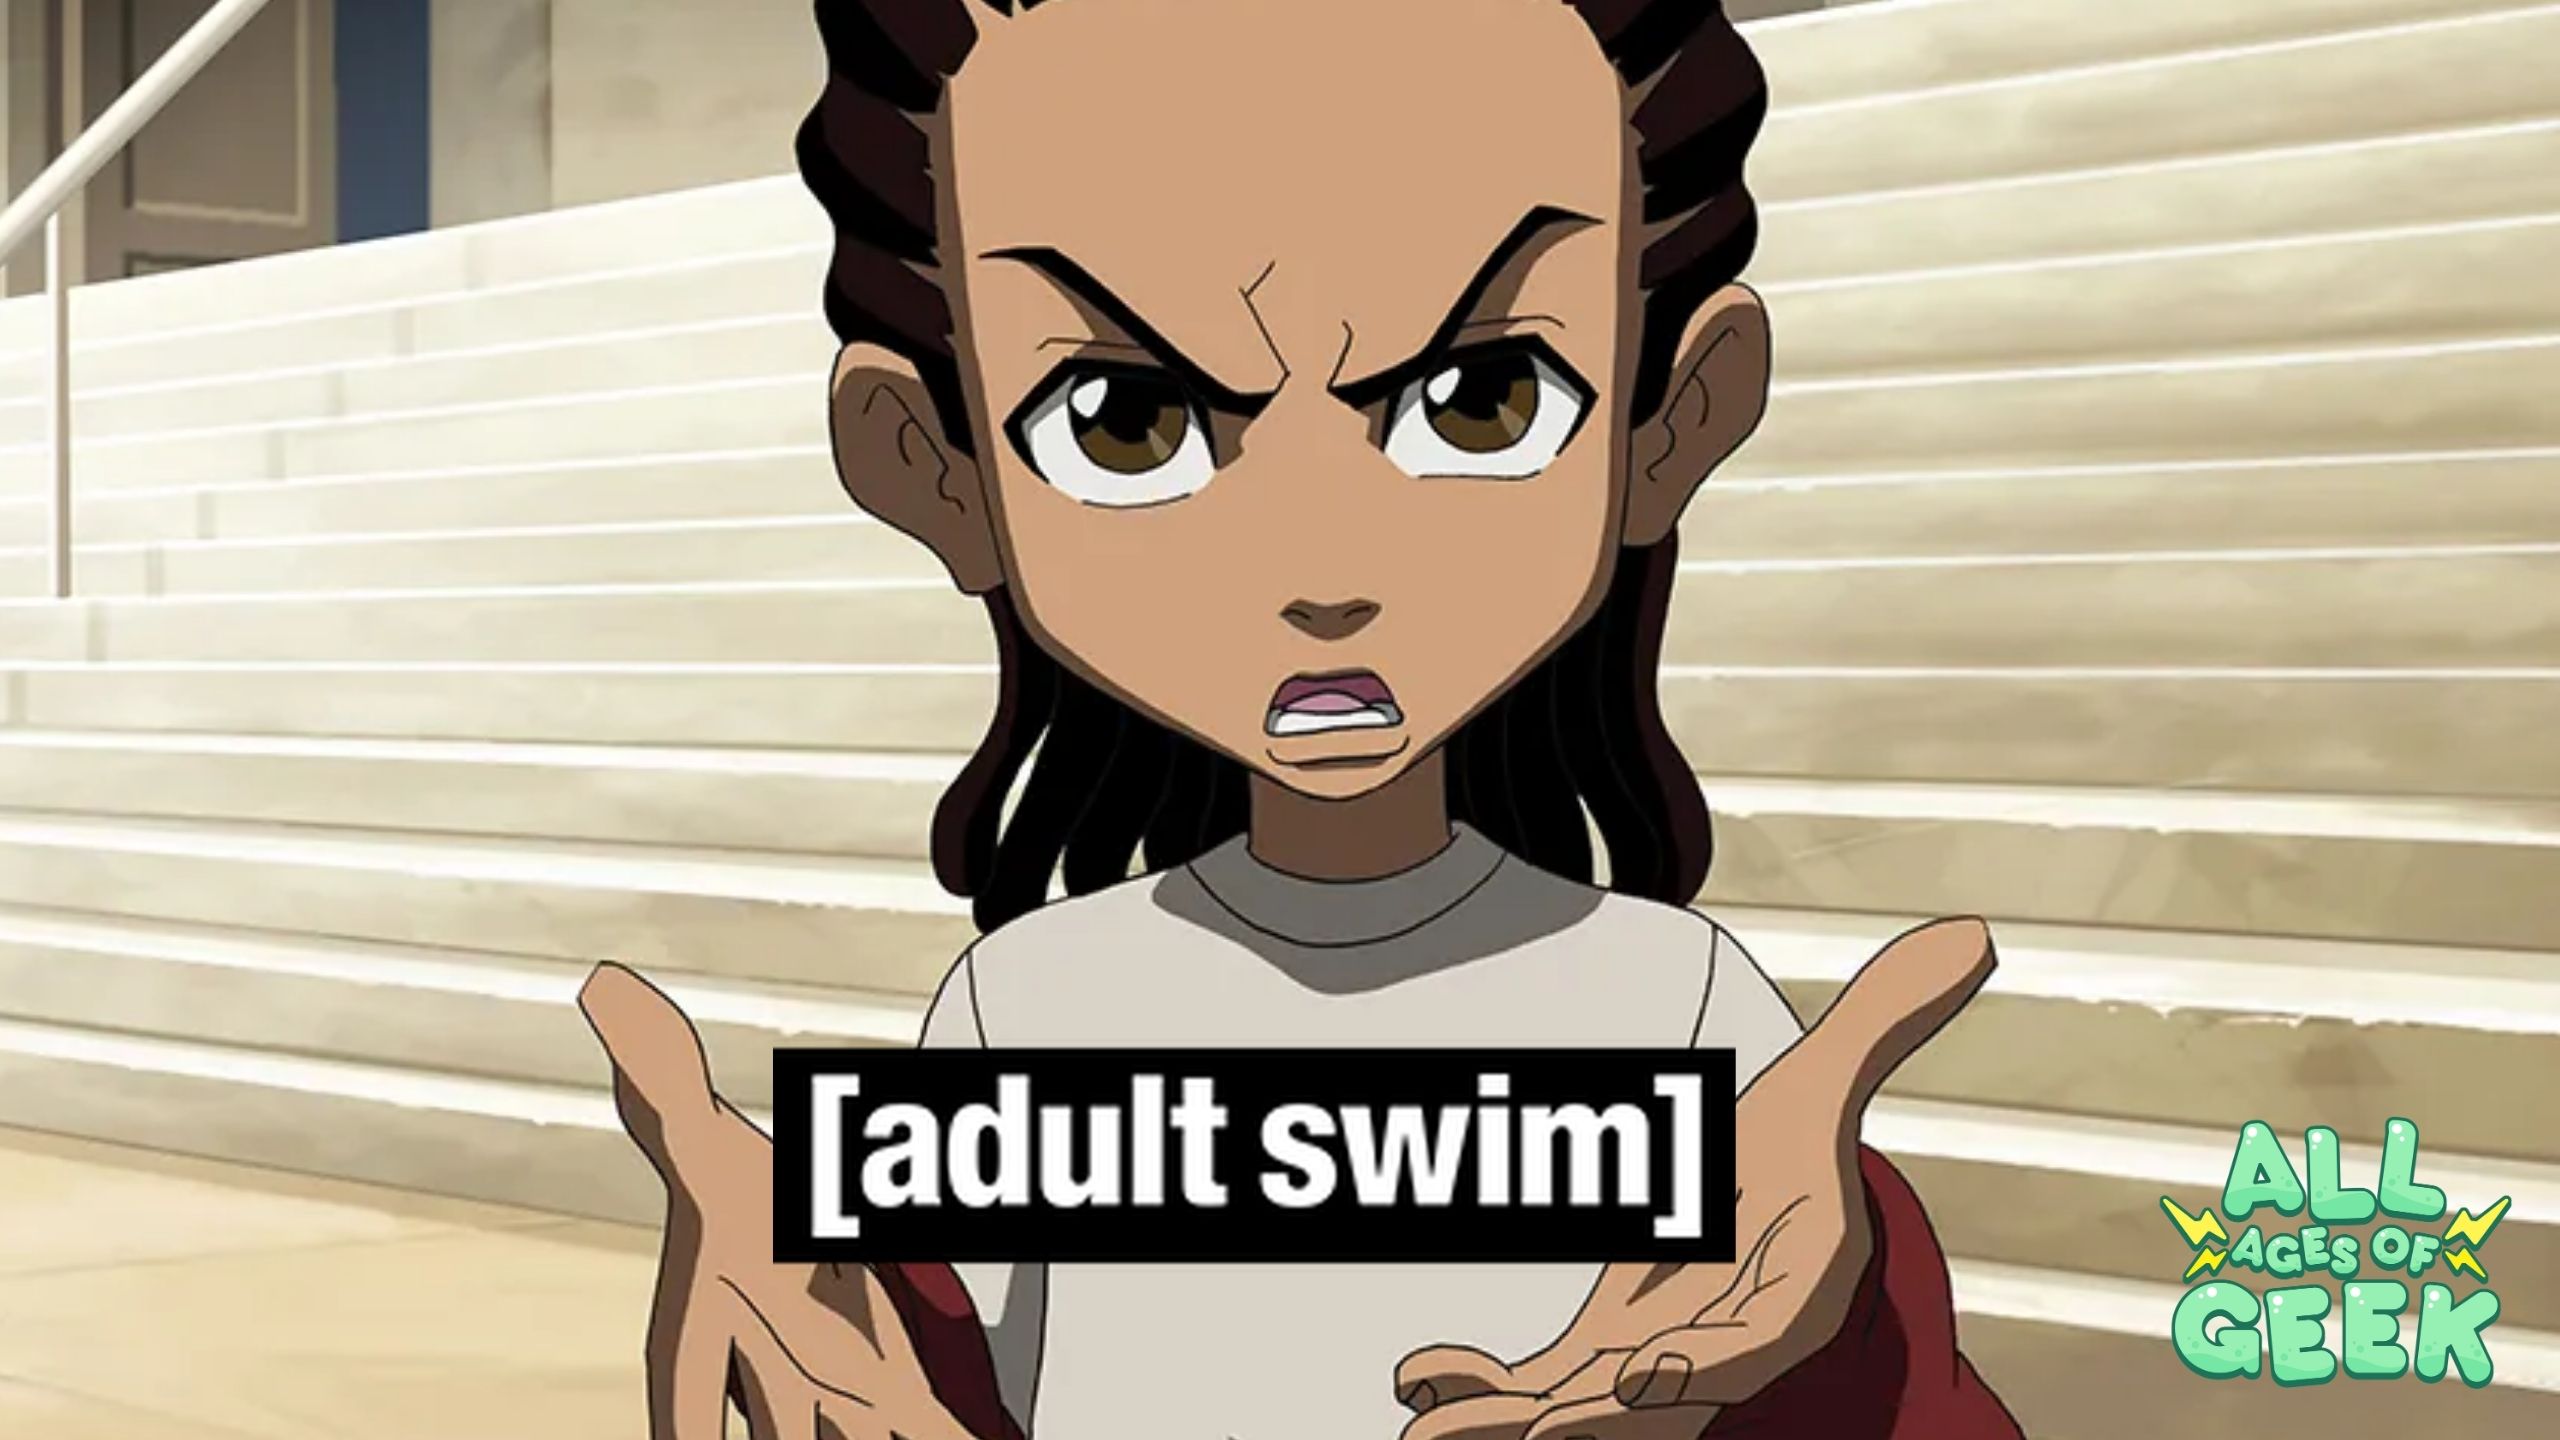 Hilarious Adult Swim Cartoons that have Blessed our Screens!